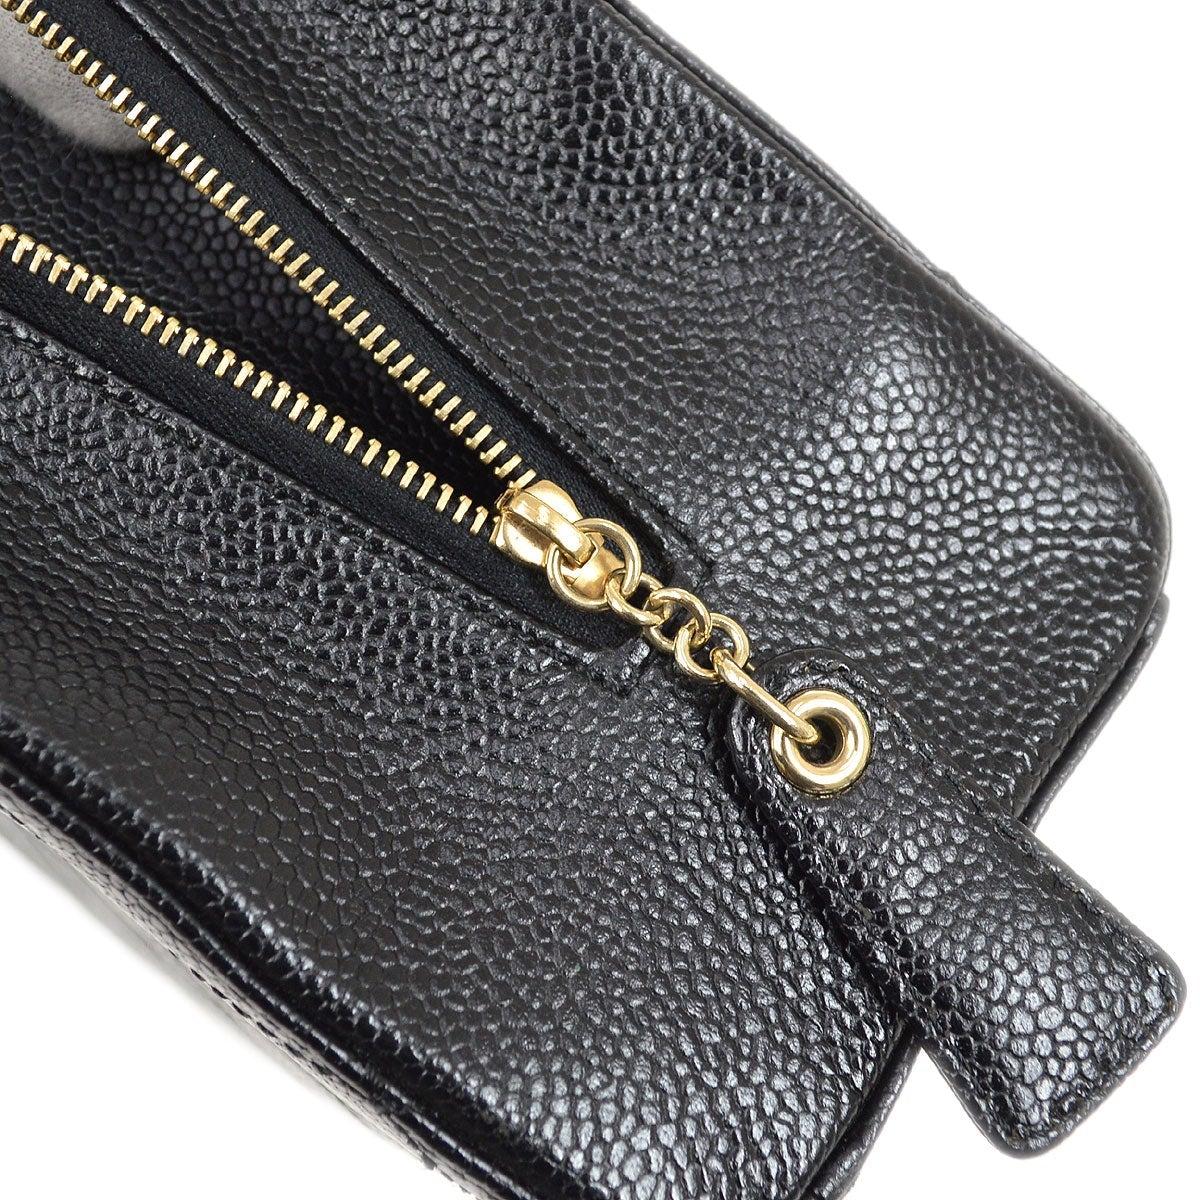 CHANEL Black Caviar Leather Gold Small Kelly Style Party Top Handle Satchel Bag 1